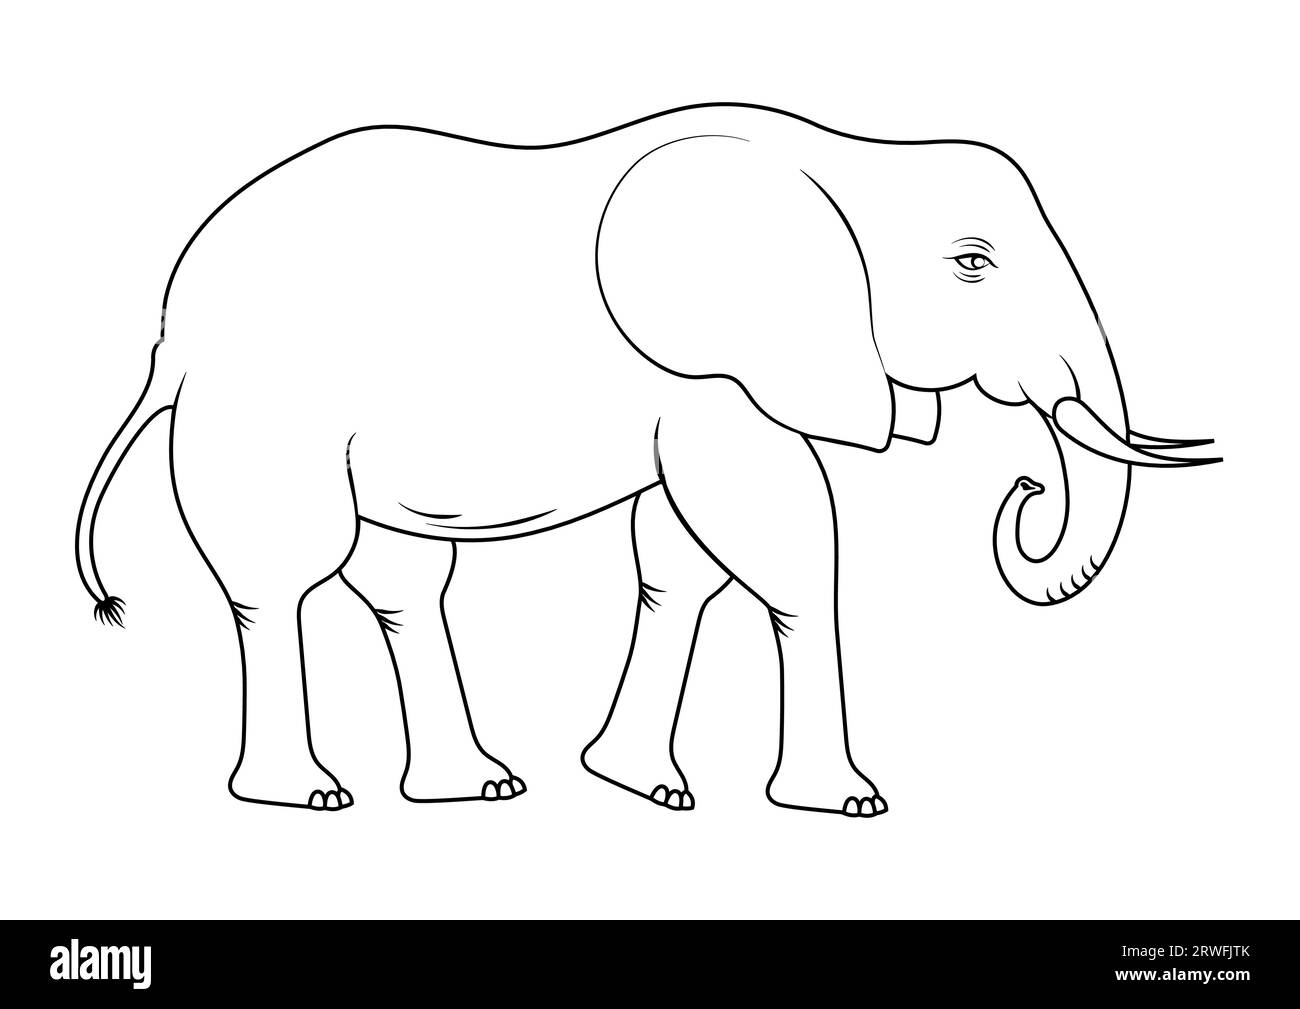 Coloring Page of a Elephant Cartoon Character Vector Stock Vector